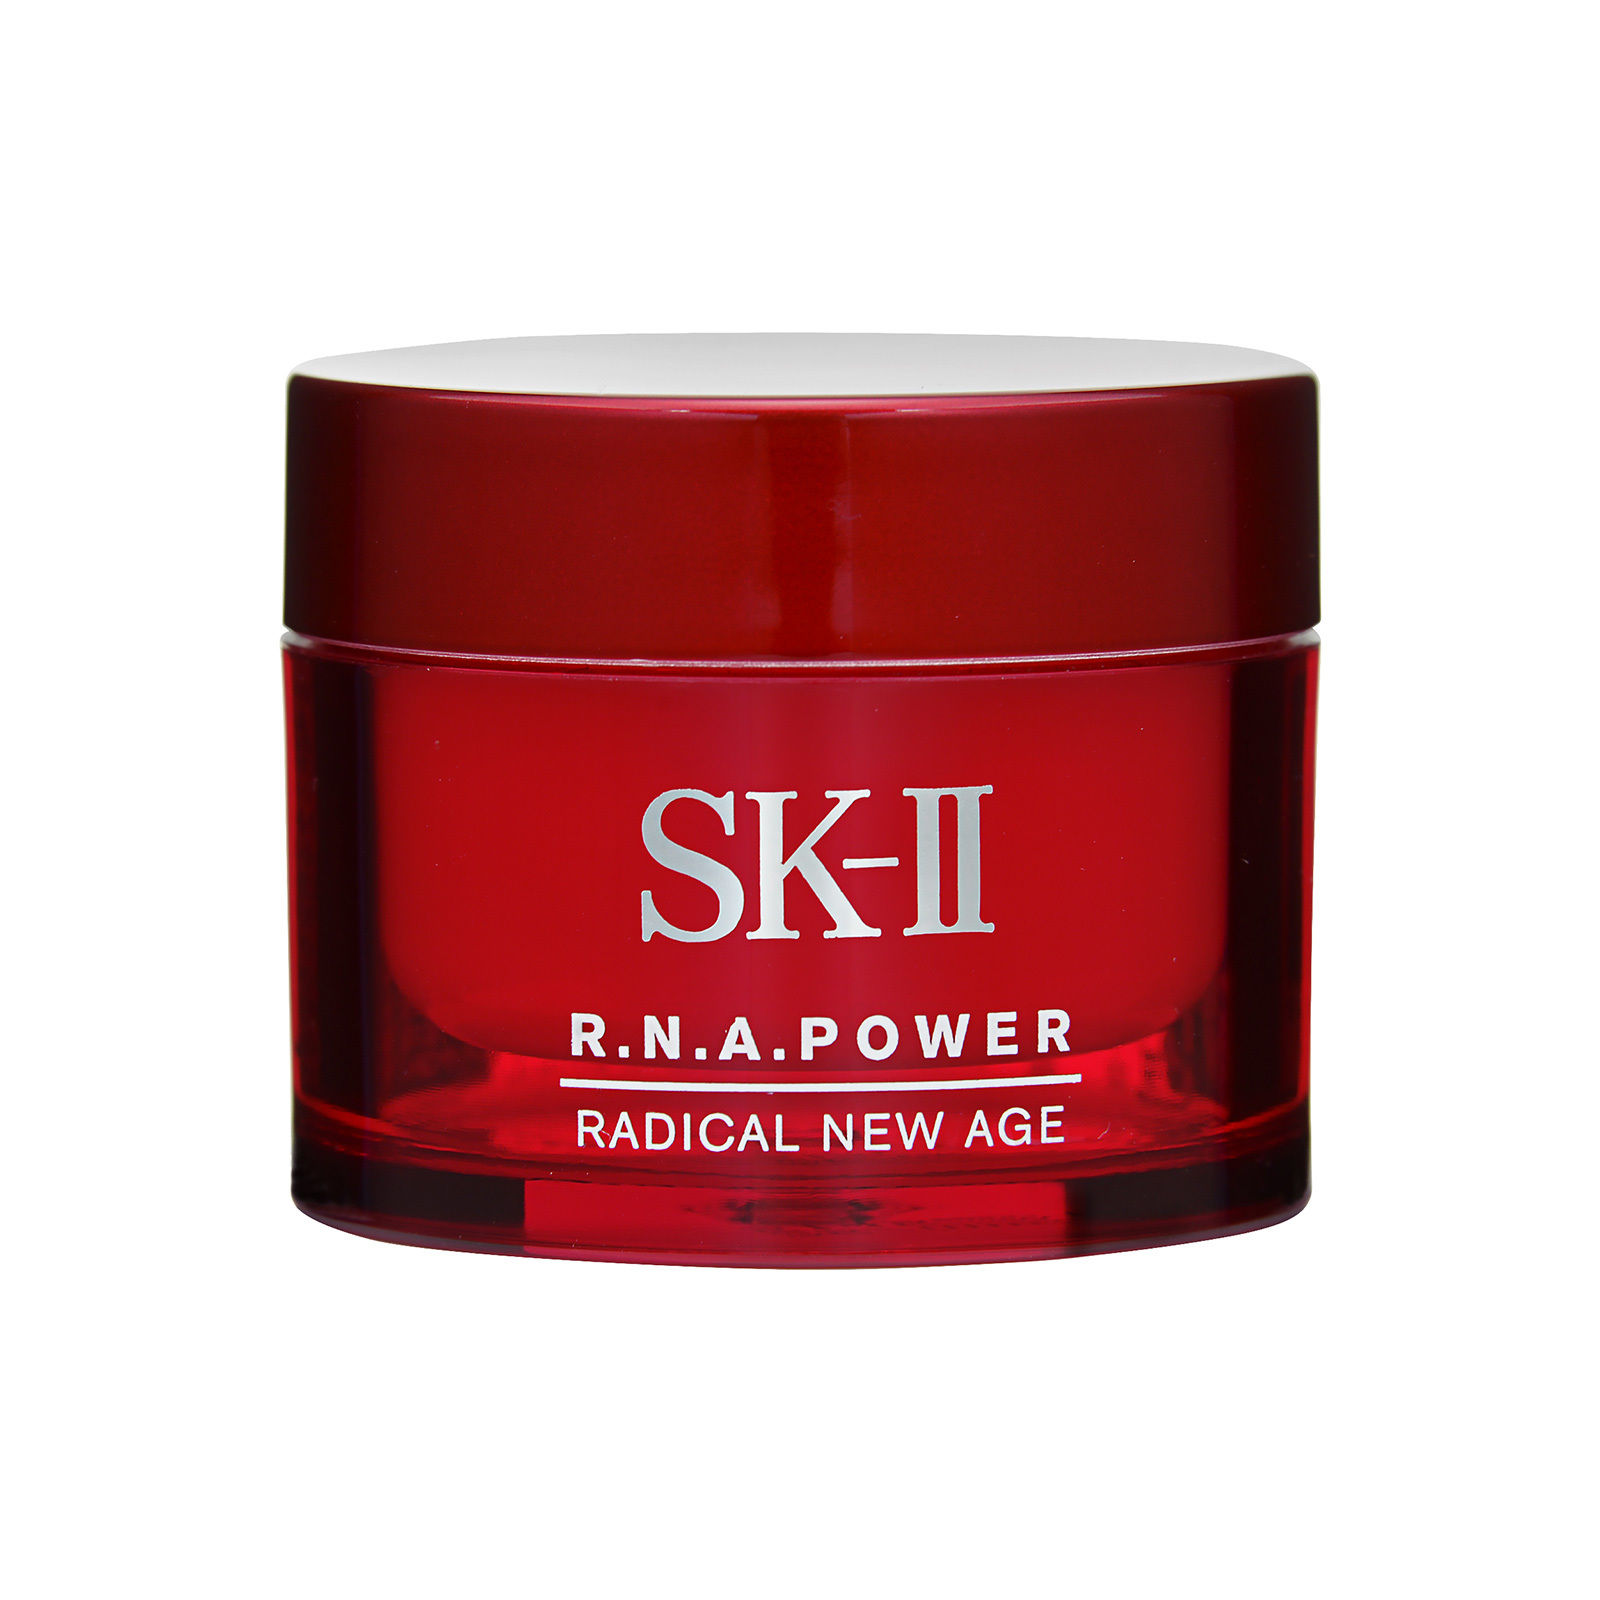 R.N.A.Power Radical New Age Cream 】at Low Price - TofuSecret™